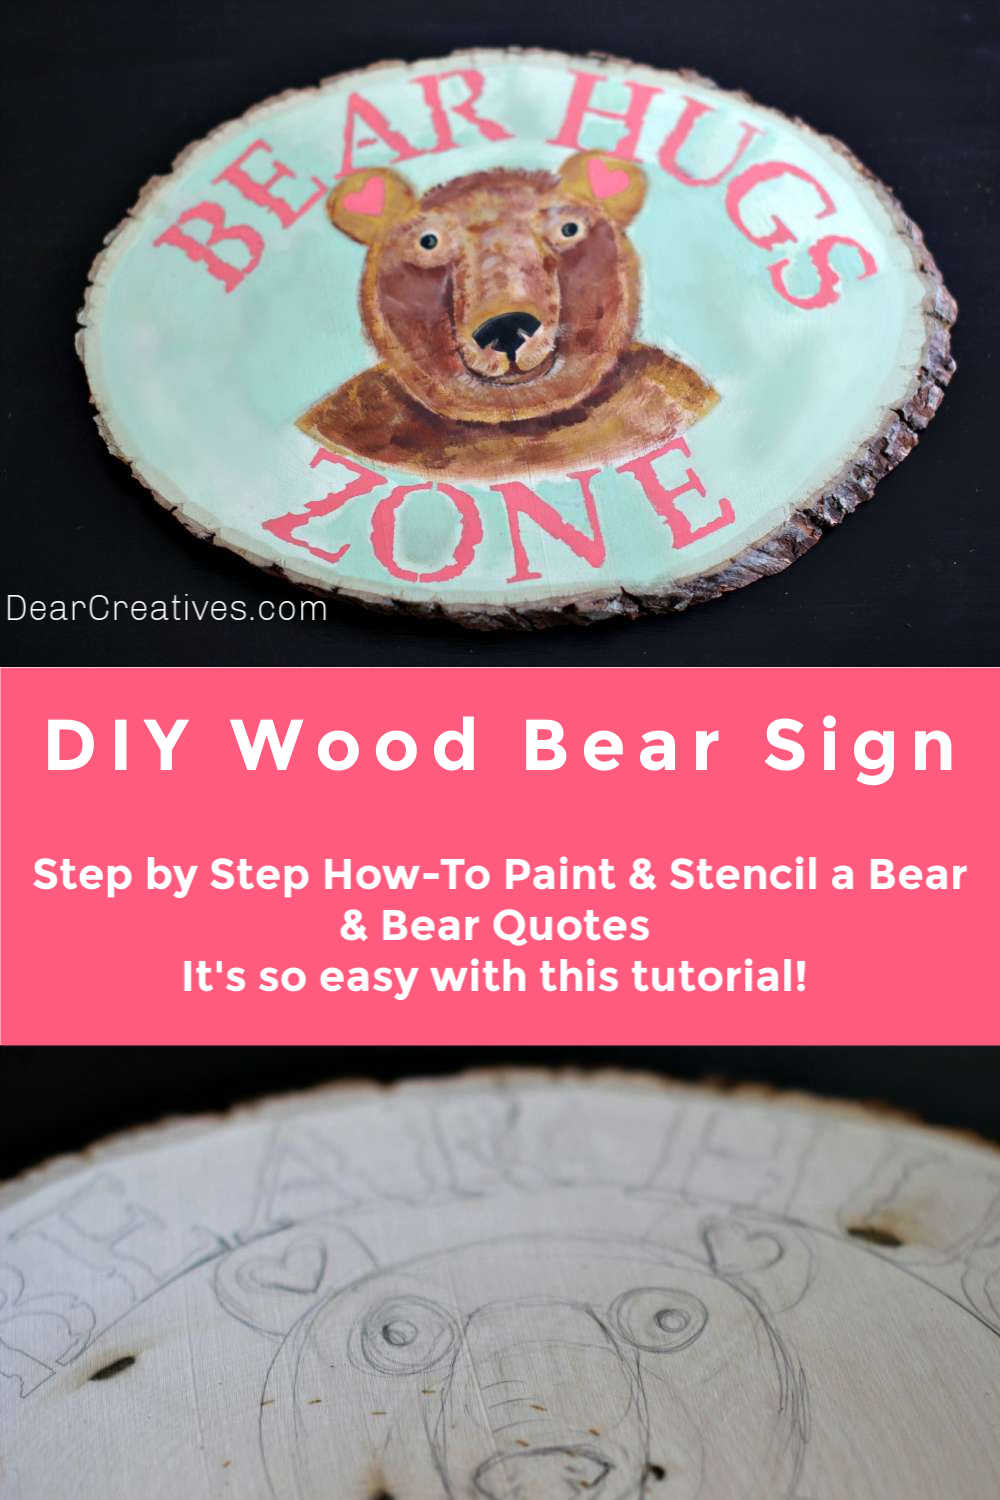 DIY Wood Bear Sign - How to paint a wood bear face and stencil a cute quote) How-to at DearCreatives.com